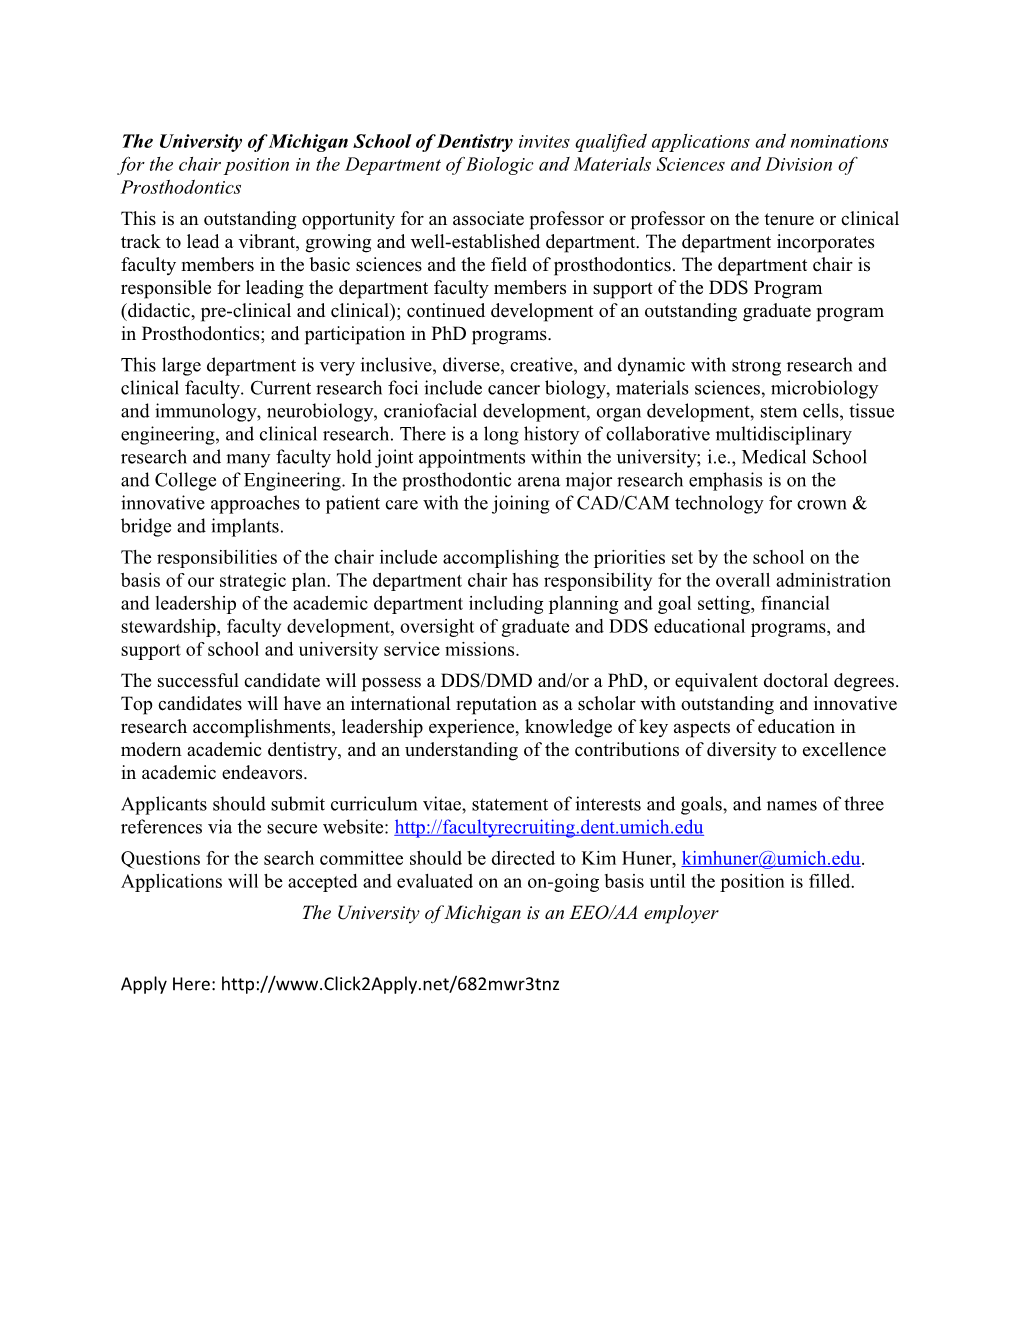 The University of Michigan School of Dentistry Invites Qualified Applications and Nominations